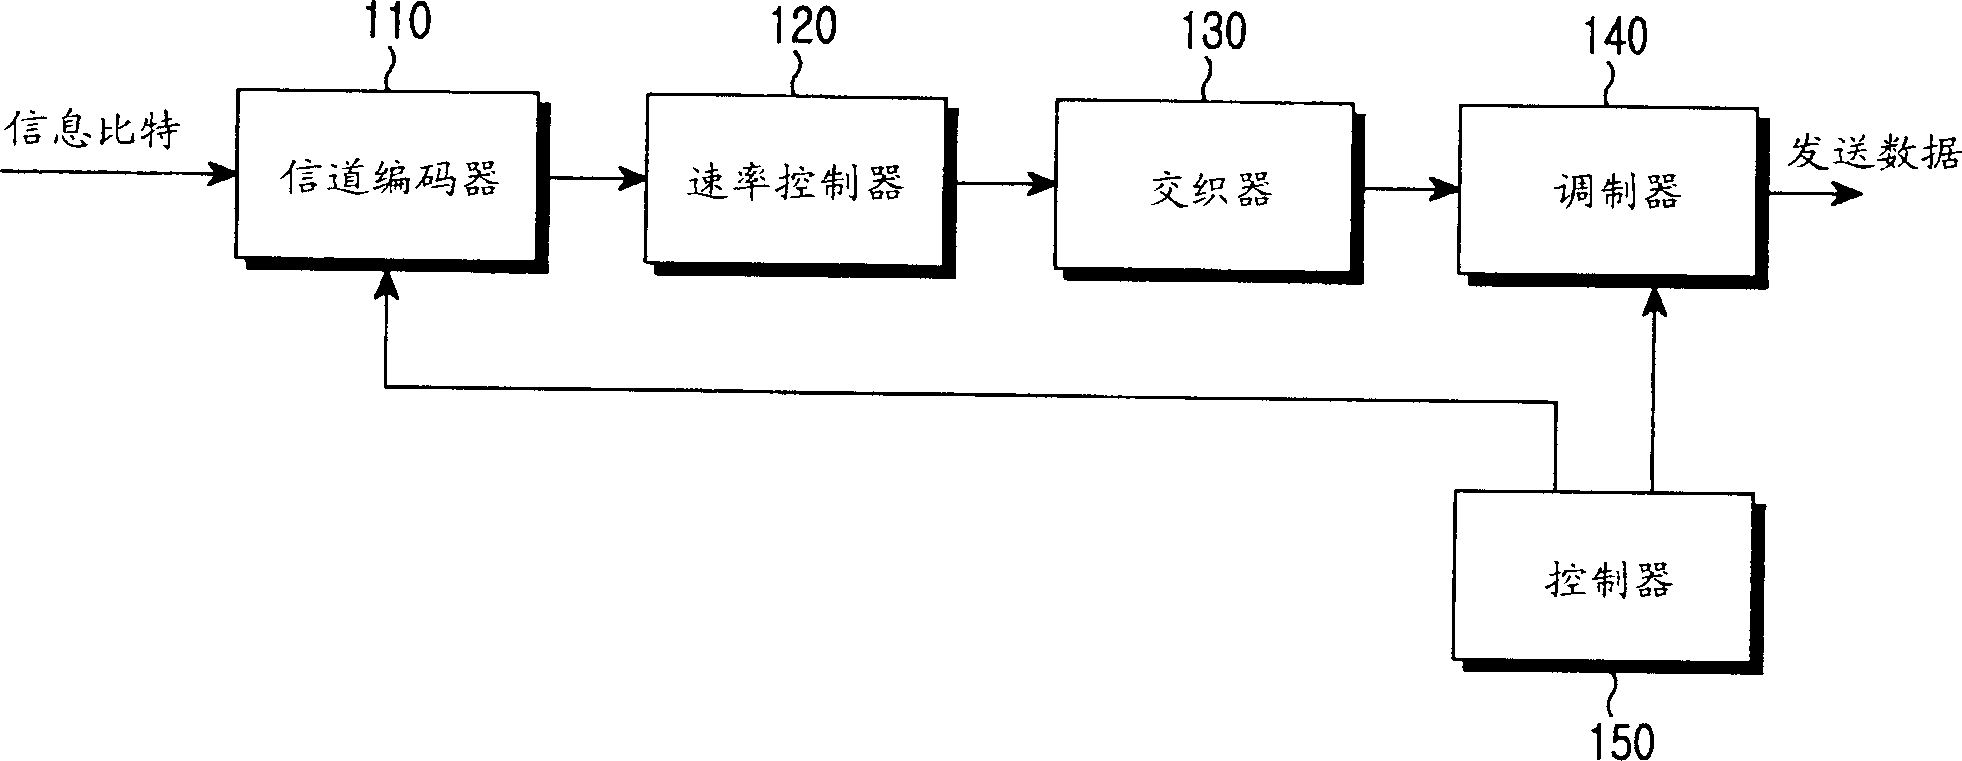 Method and apparatus for sending/receiving of block resending in mobile communication system